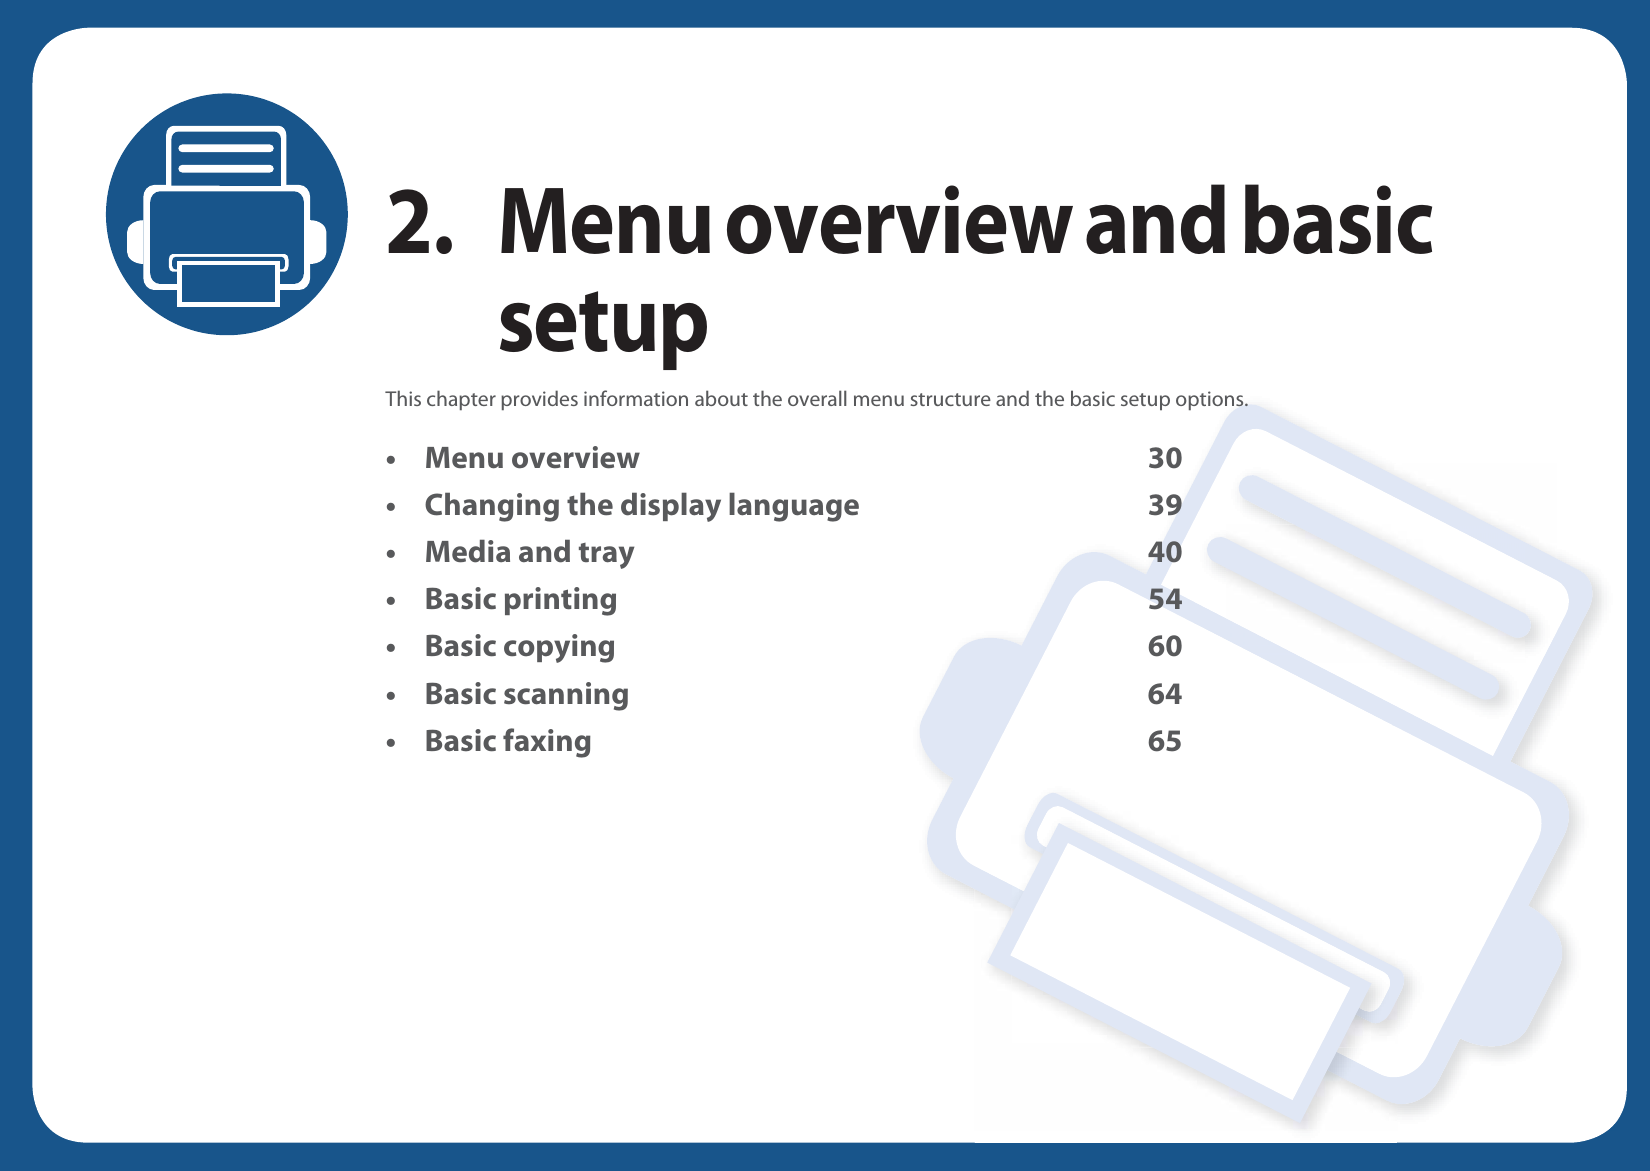 2. Menu overview and basic setupThis chapter provides information about the overall menu structure and the basic setup options.• Menu overview 30• Changing the display language 39• Media and tray 40• Basic printing 54• Basic copying 60• Basic scanning 64• Basic faxing 65